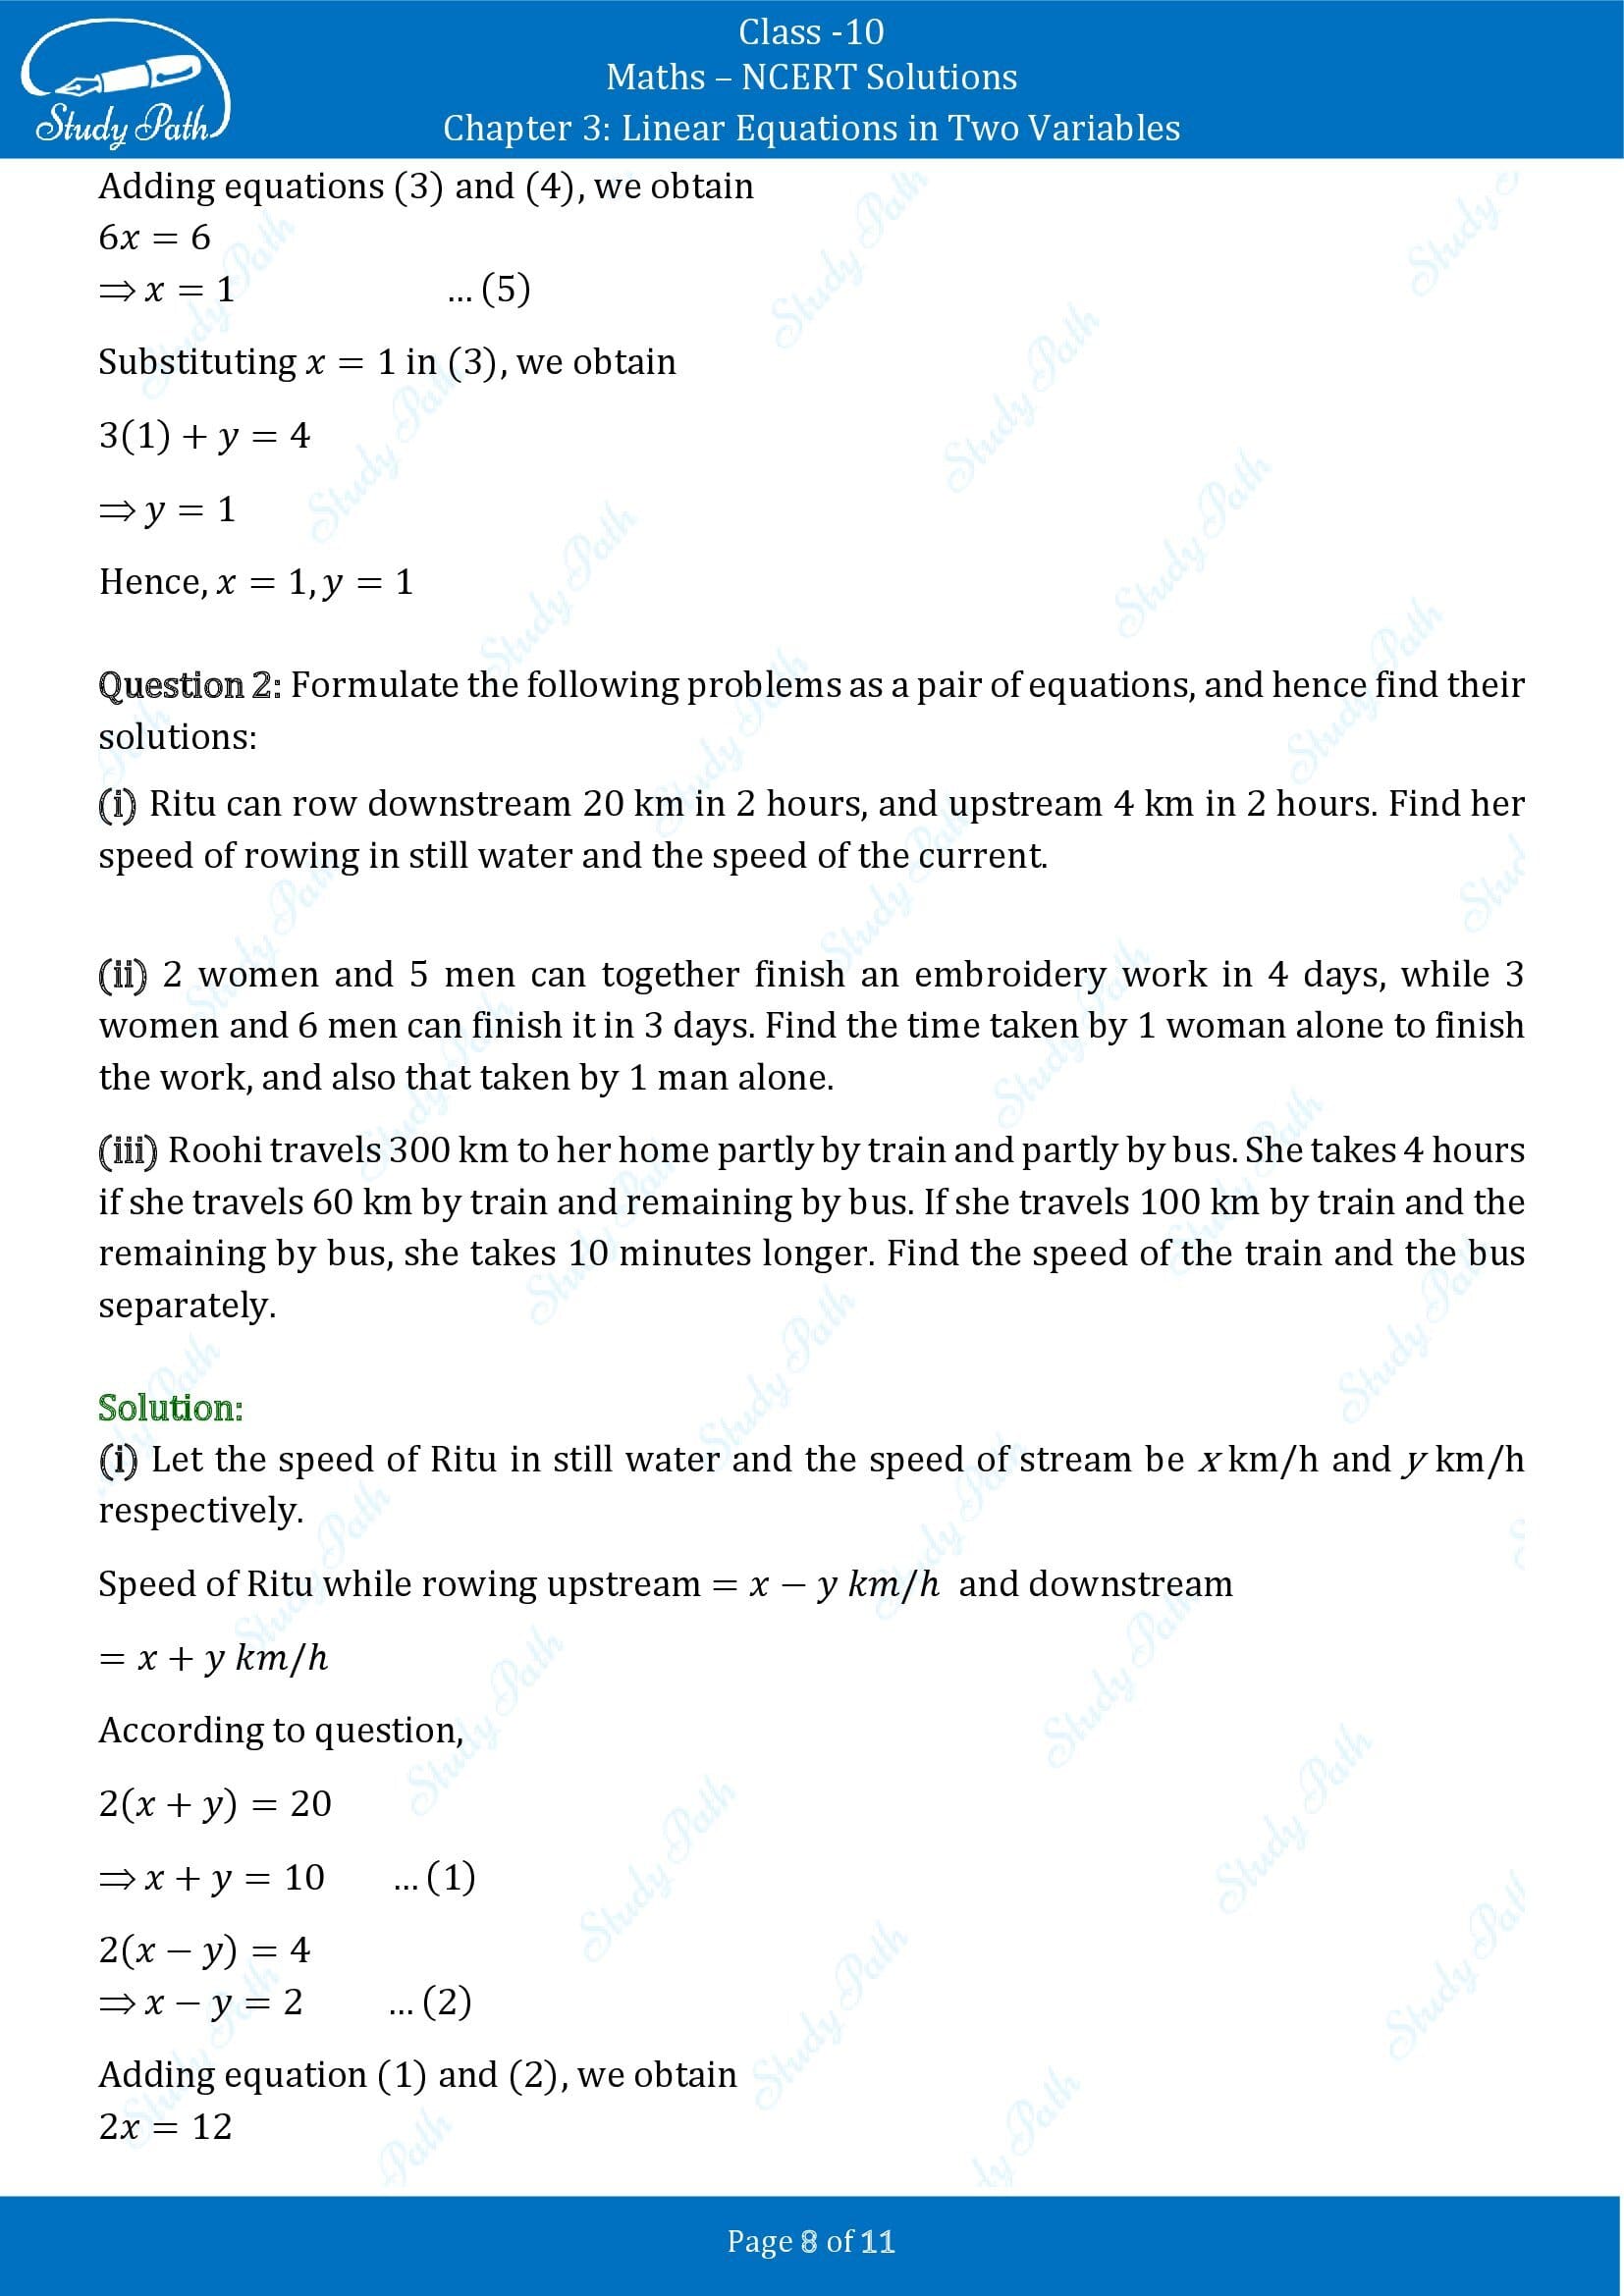 NCERT Solutions for Class 10 Maths Chapter 3 Linear Equations in Two Variables Exercise 3.6 00008